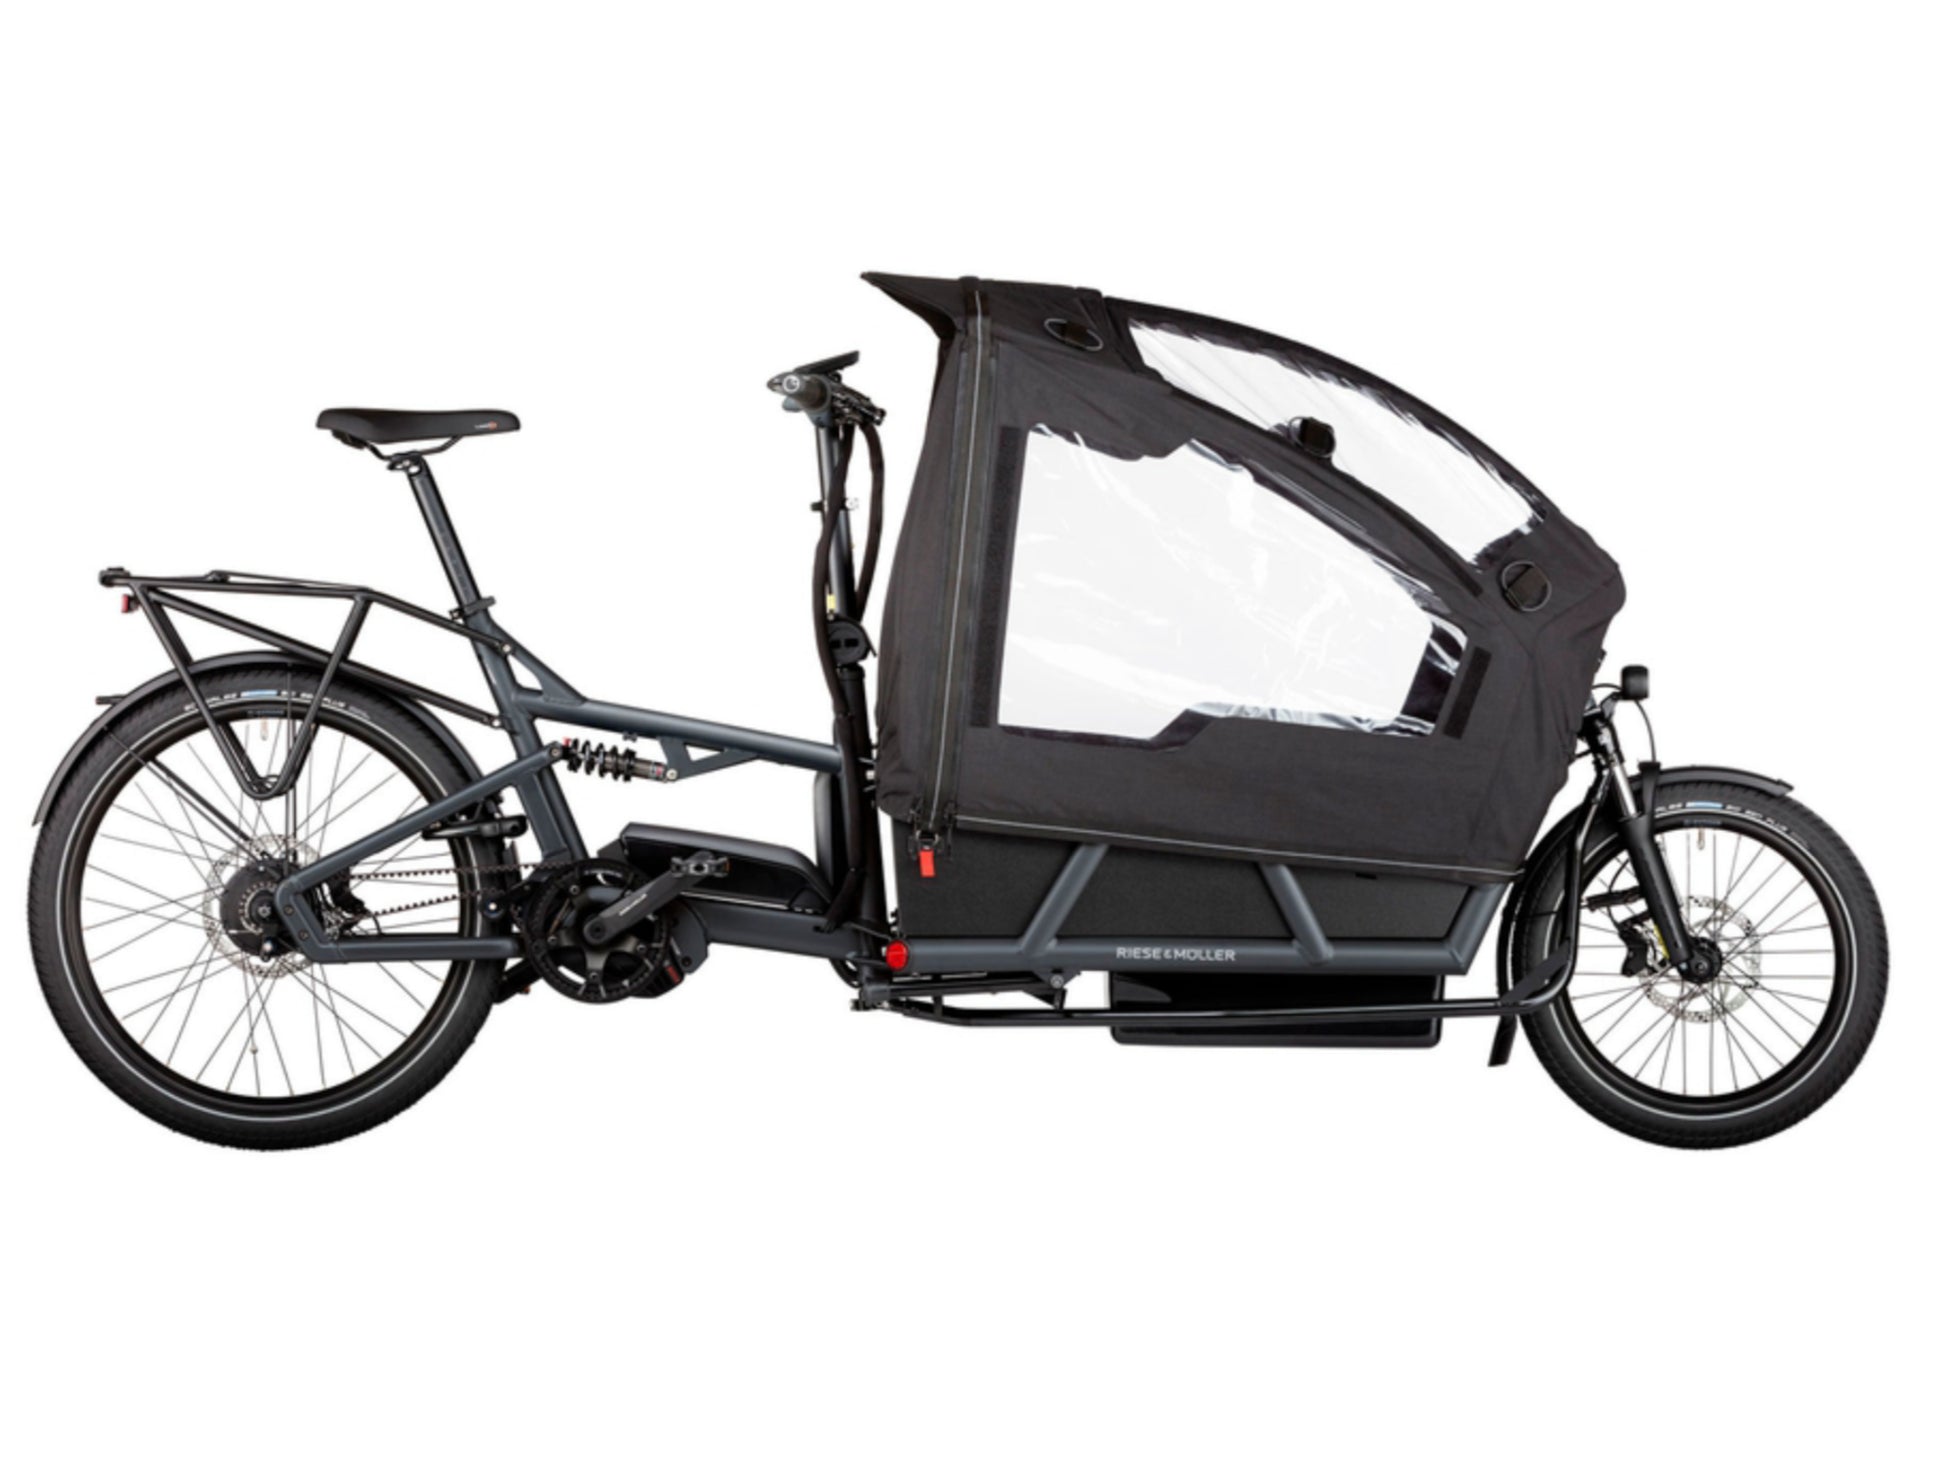 Riese and Muller Load 75 Rohloff eMTB full suspension Nyon Dual Battery carrier low sidewalls three child seats child cover options